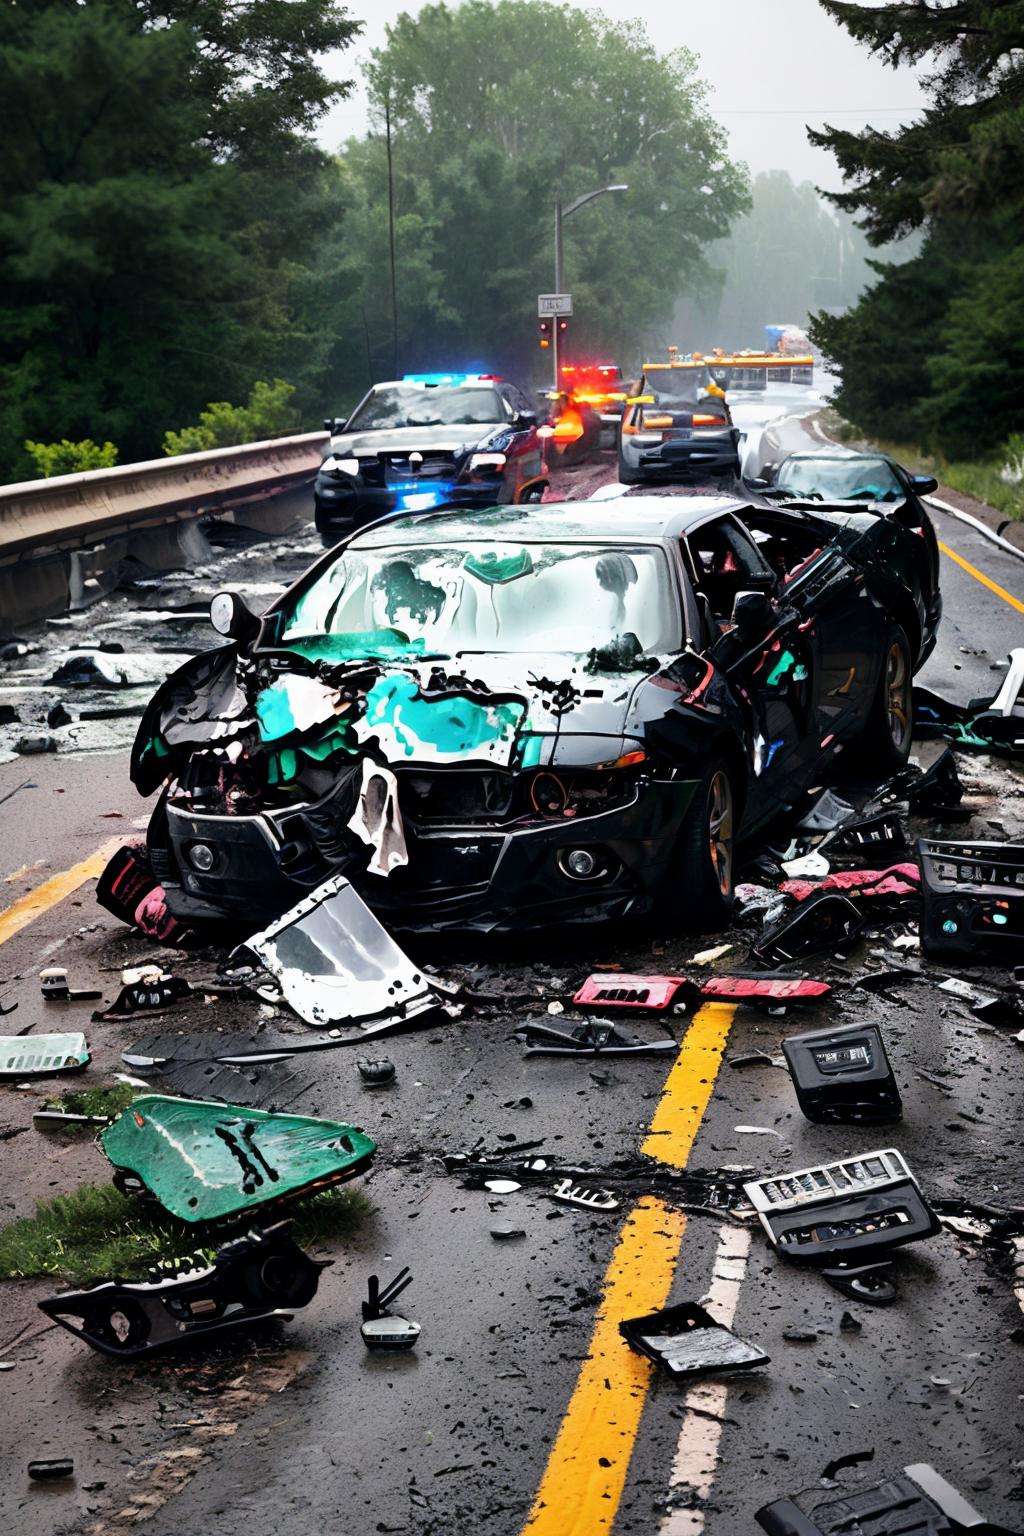 A devastating car crash scene unfolds on a rain-soaked highway, the wreckage and shattered glass reflecting the chaos and destruction:1.5, devastating car crash:1.2, rain-soaked highway:1.2, wreckage:1.1, shattered glass:1.1, chaos:1.0, destruction:1.0. , RoadWreck_Simulator